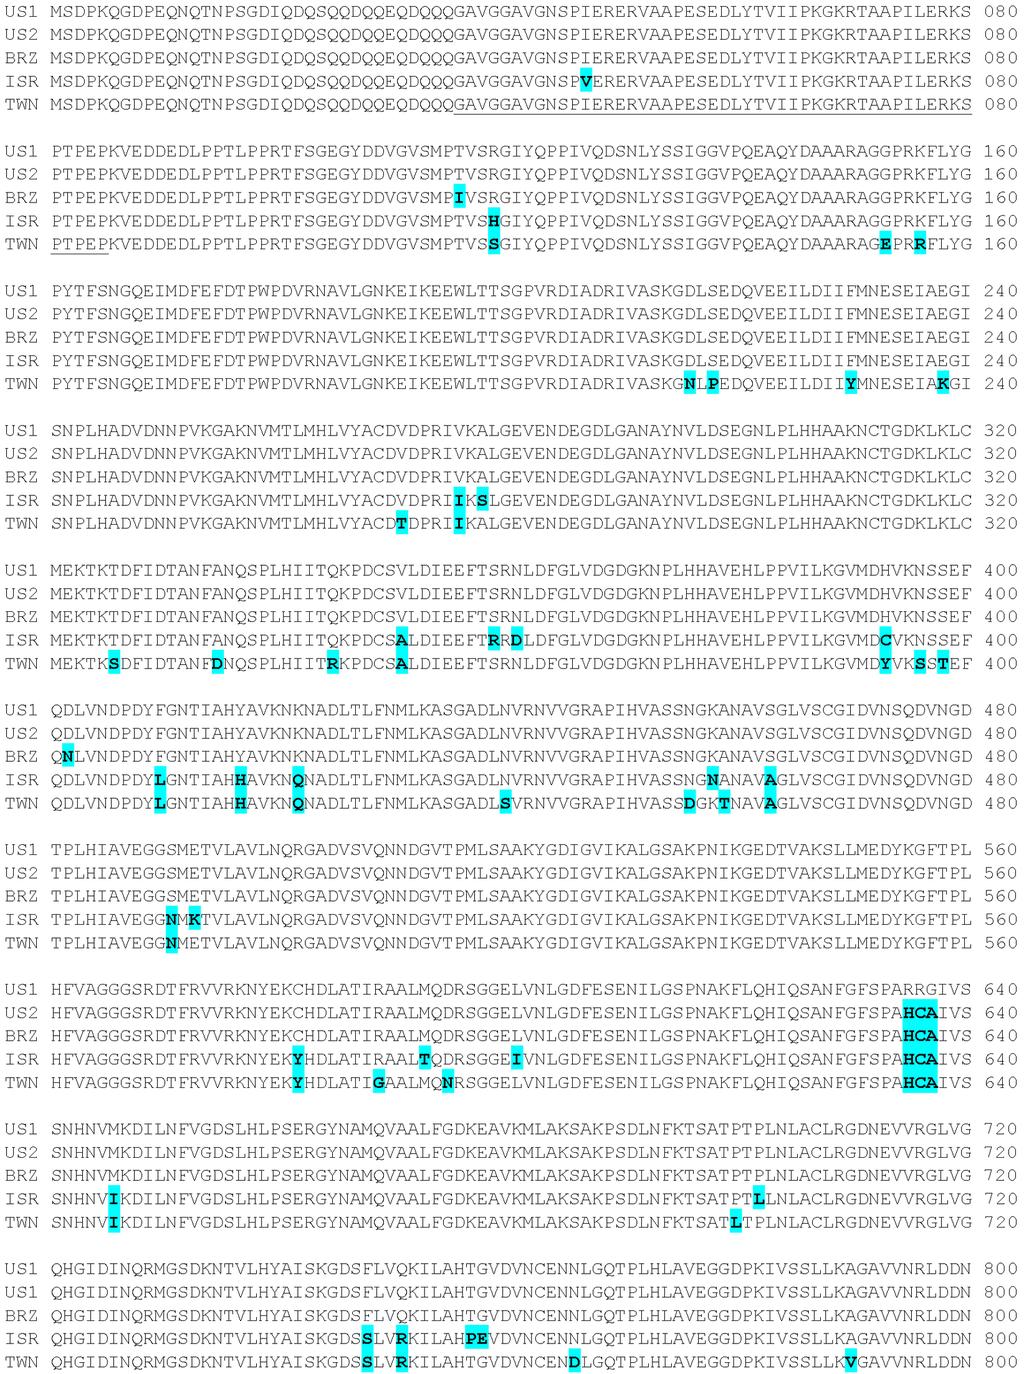 336 Chia-Chia Huang et al. Fig. 3. Alignment of the deduced amino acid sequences of E. canis gp200.